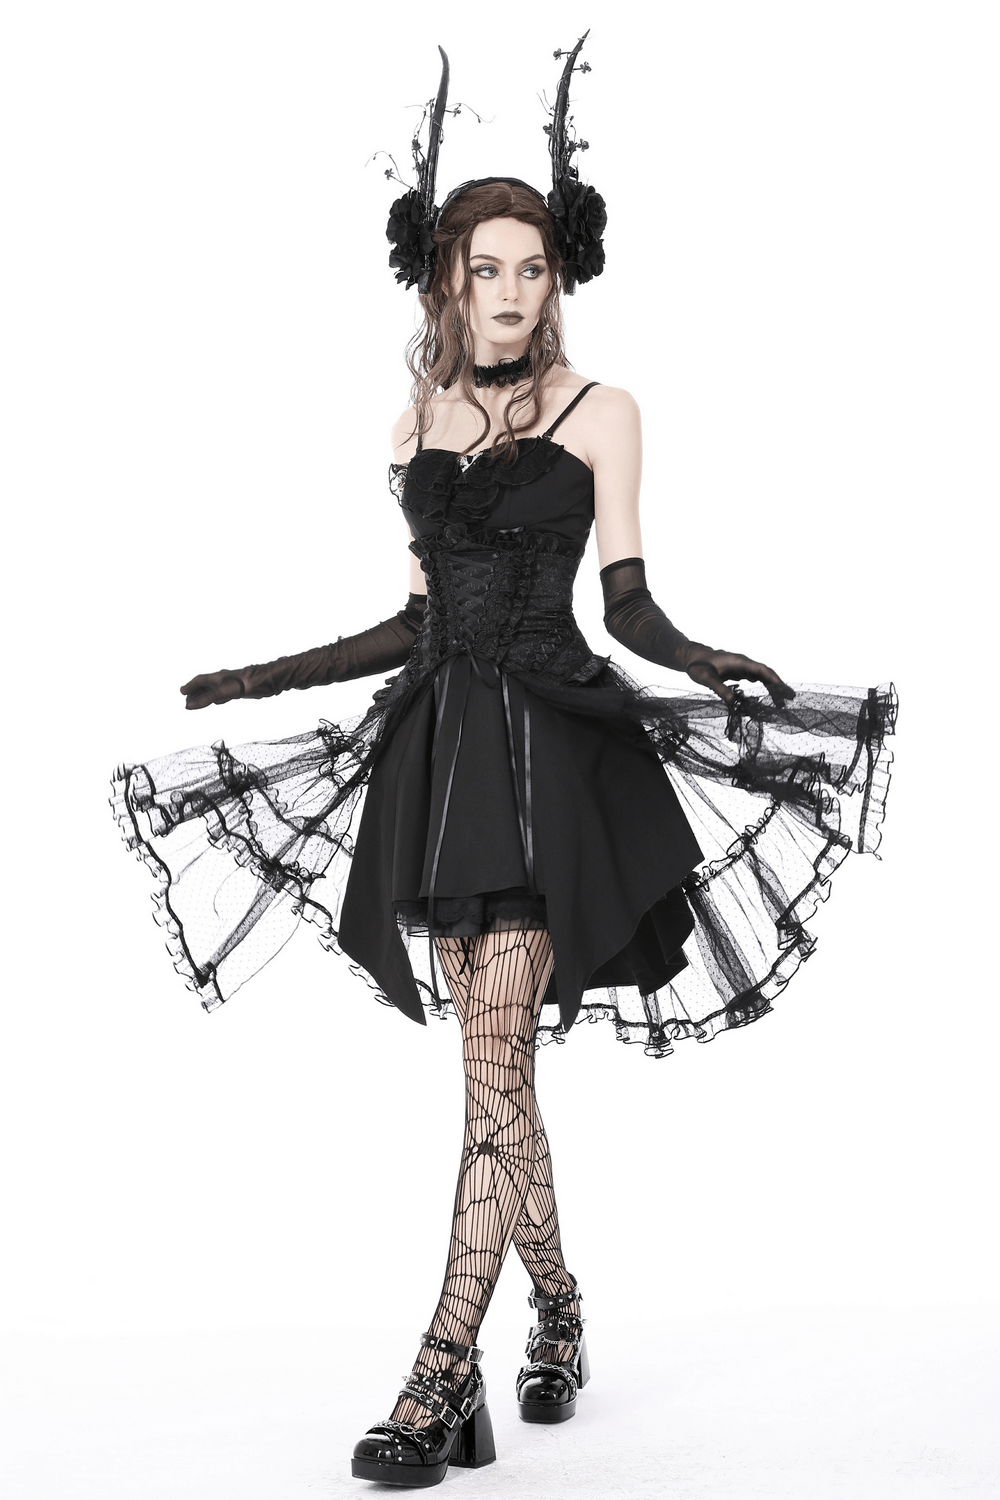 Gothic Luxe Mesh Skirt with Corset Belt for Women